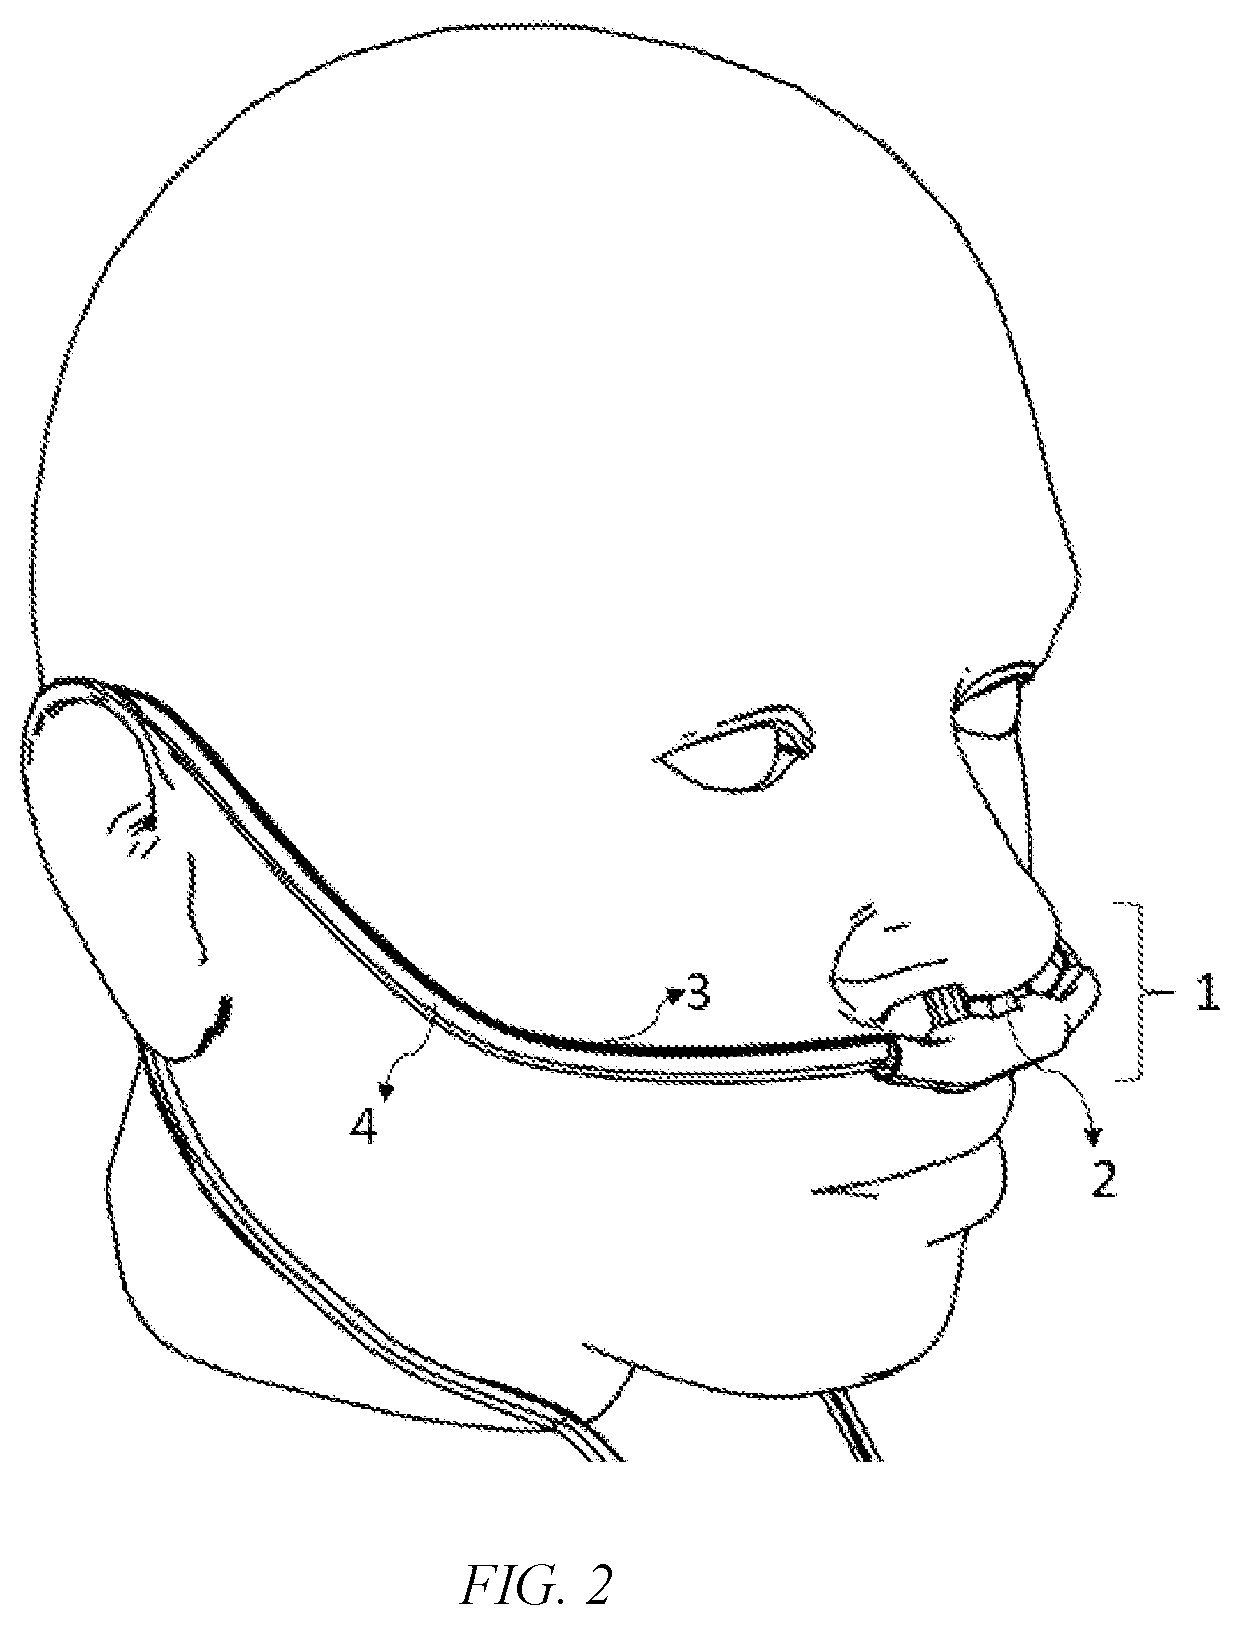 Nasal oxygen cannula with device for measuring use time